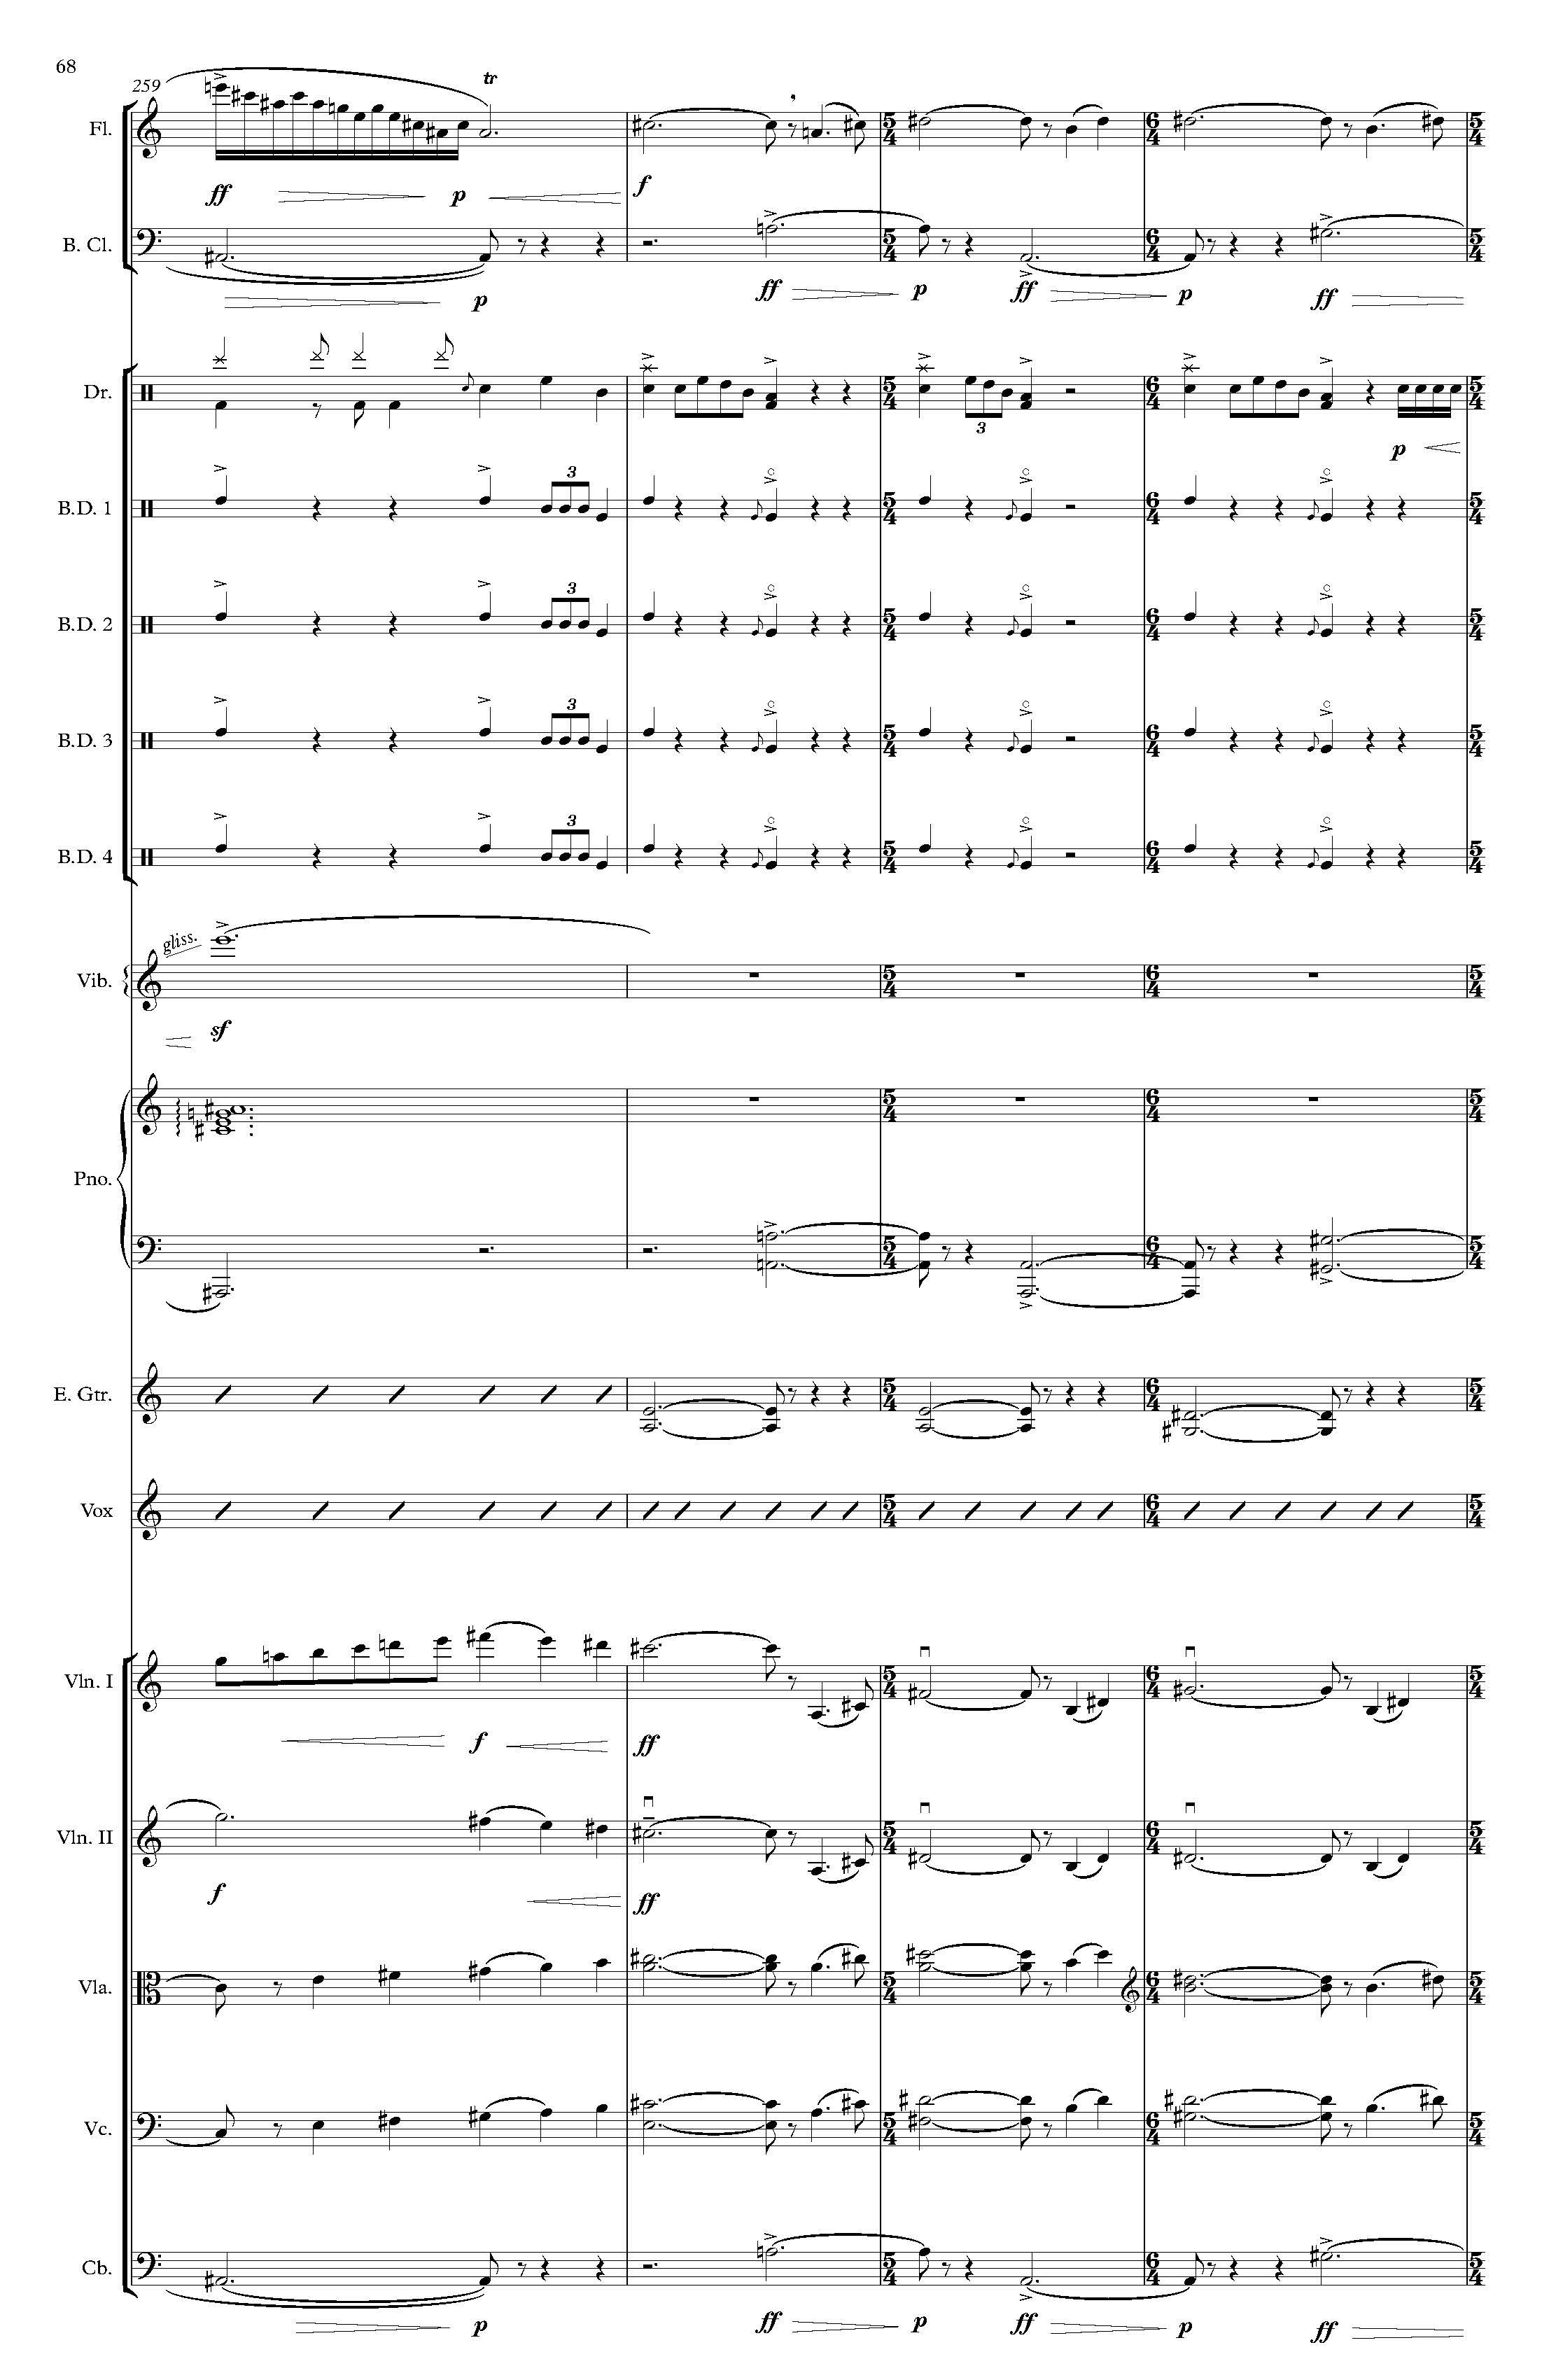 The Rembrandt of Avenue A - Complete Score_Page_74.jpg